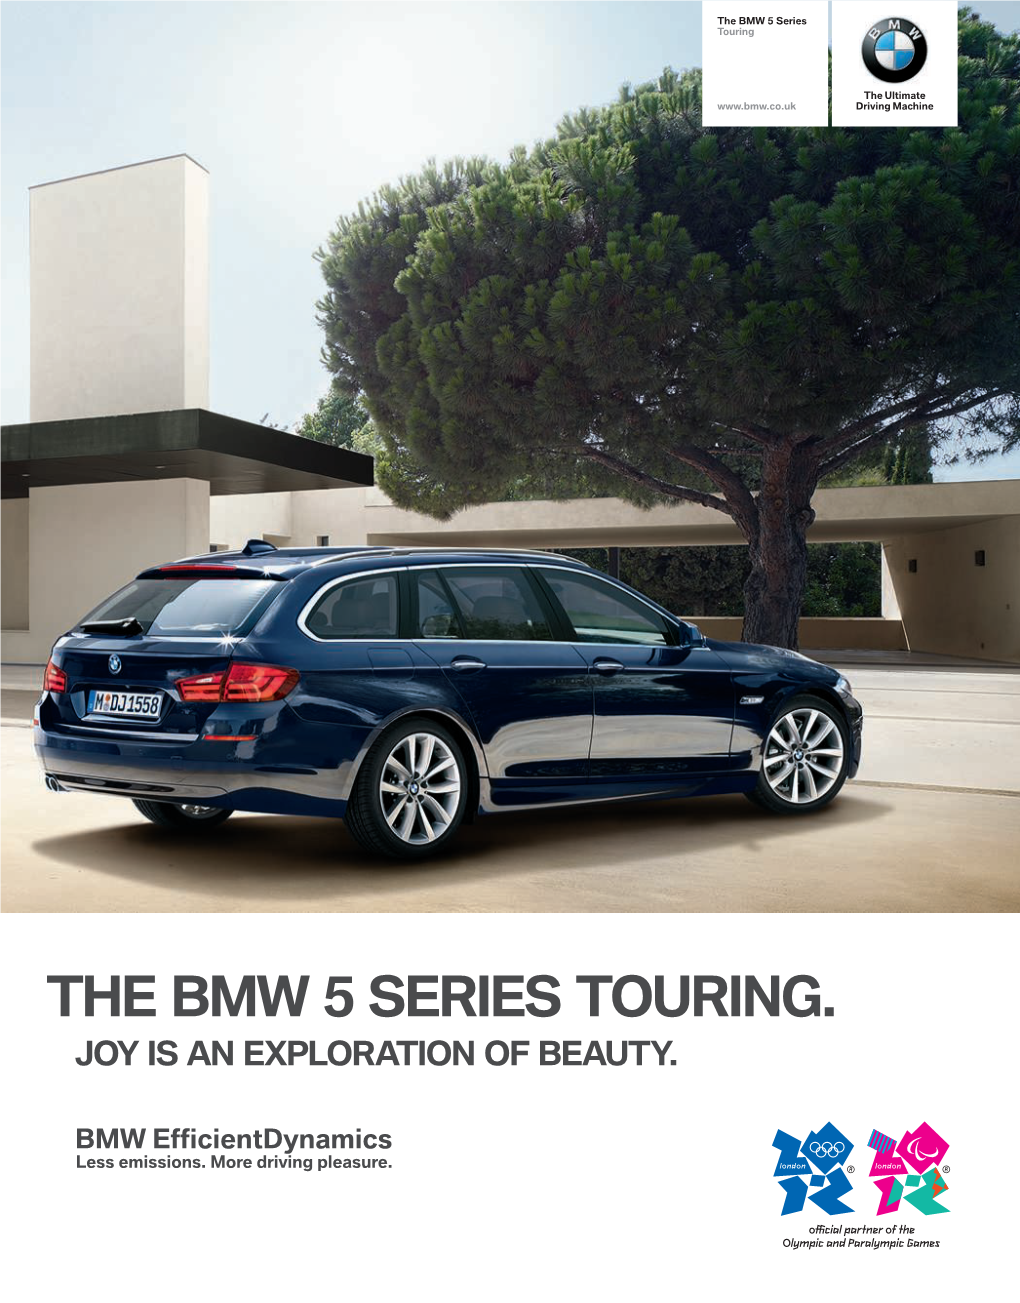 The Bmw Series Touring